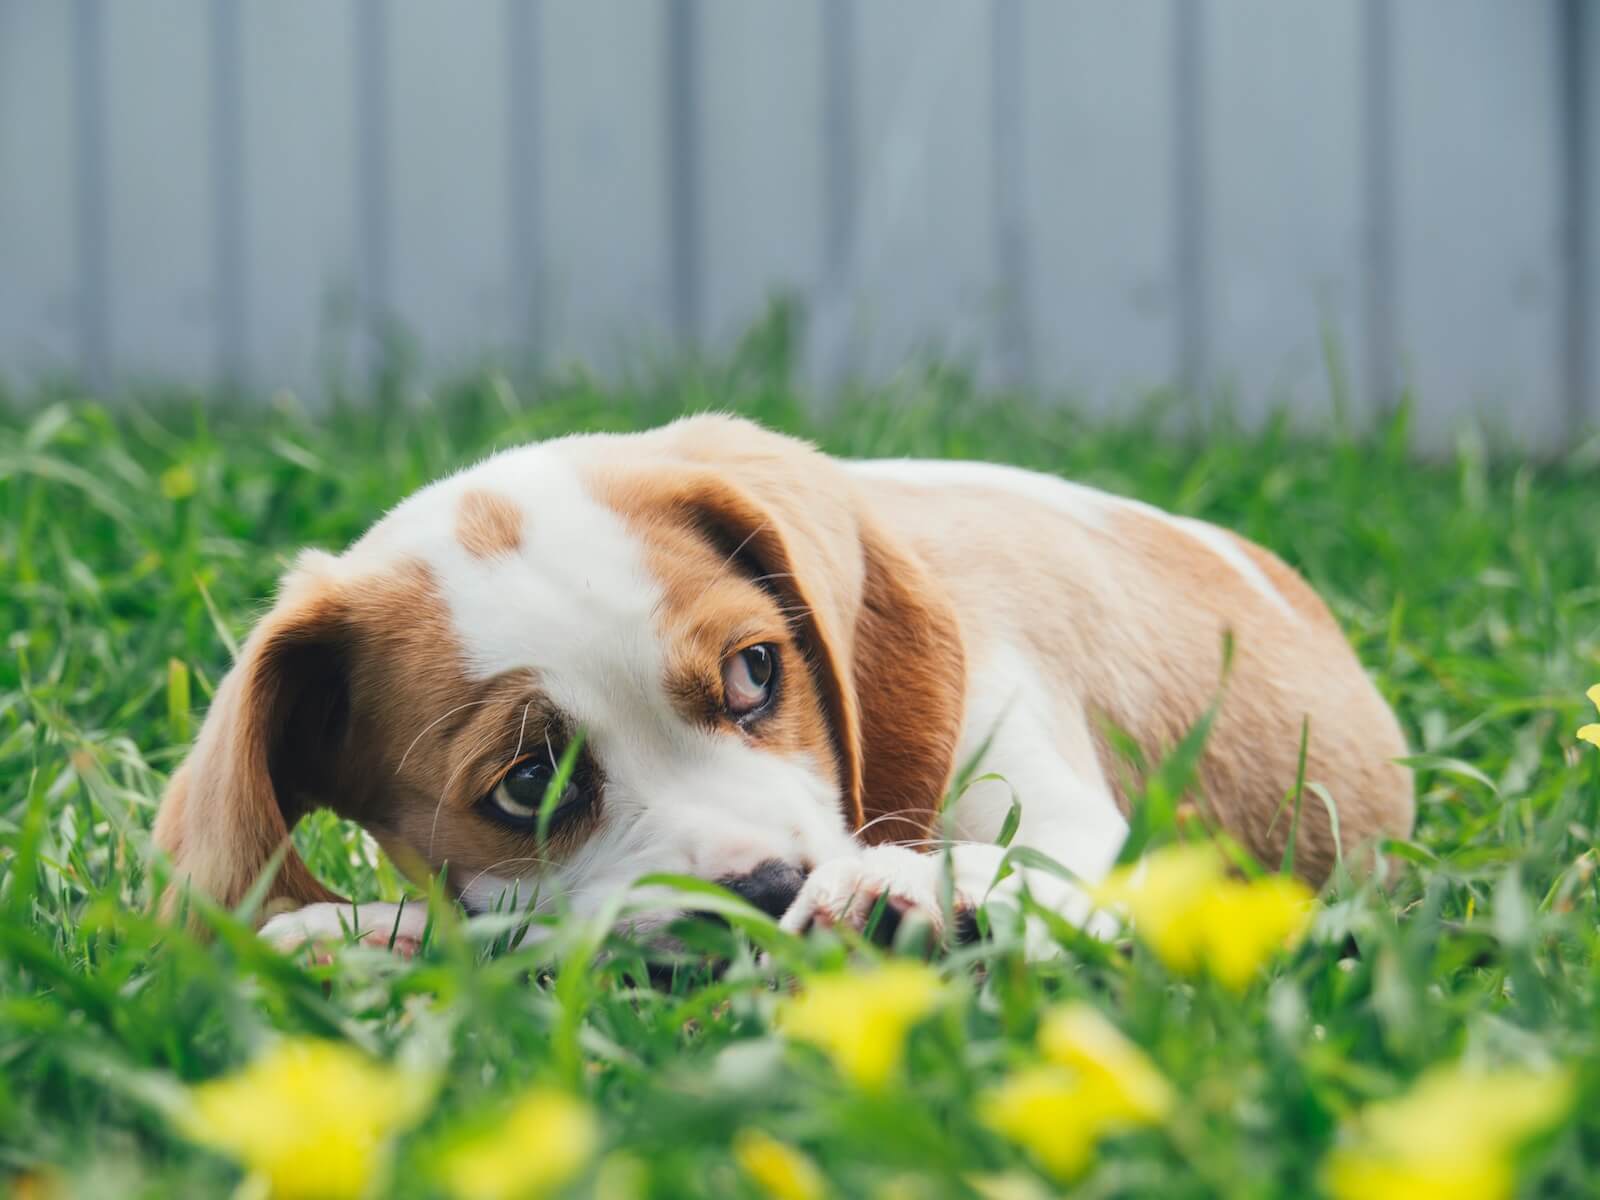 brown and white puppy lying on green grass with yellow flowers